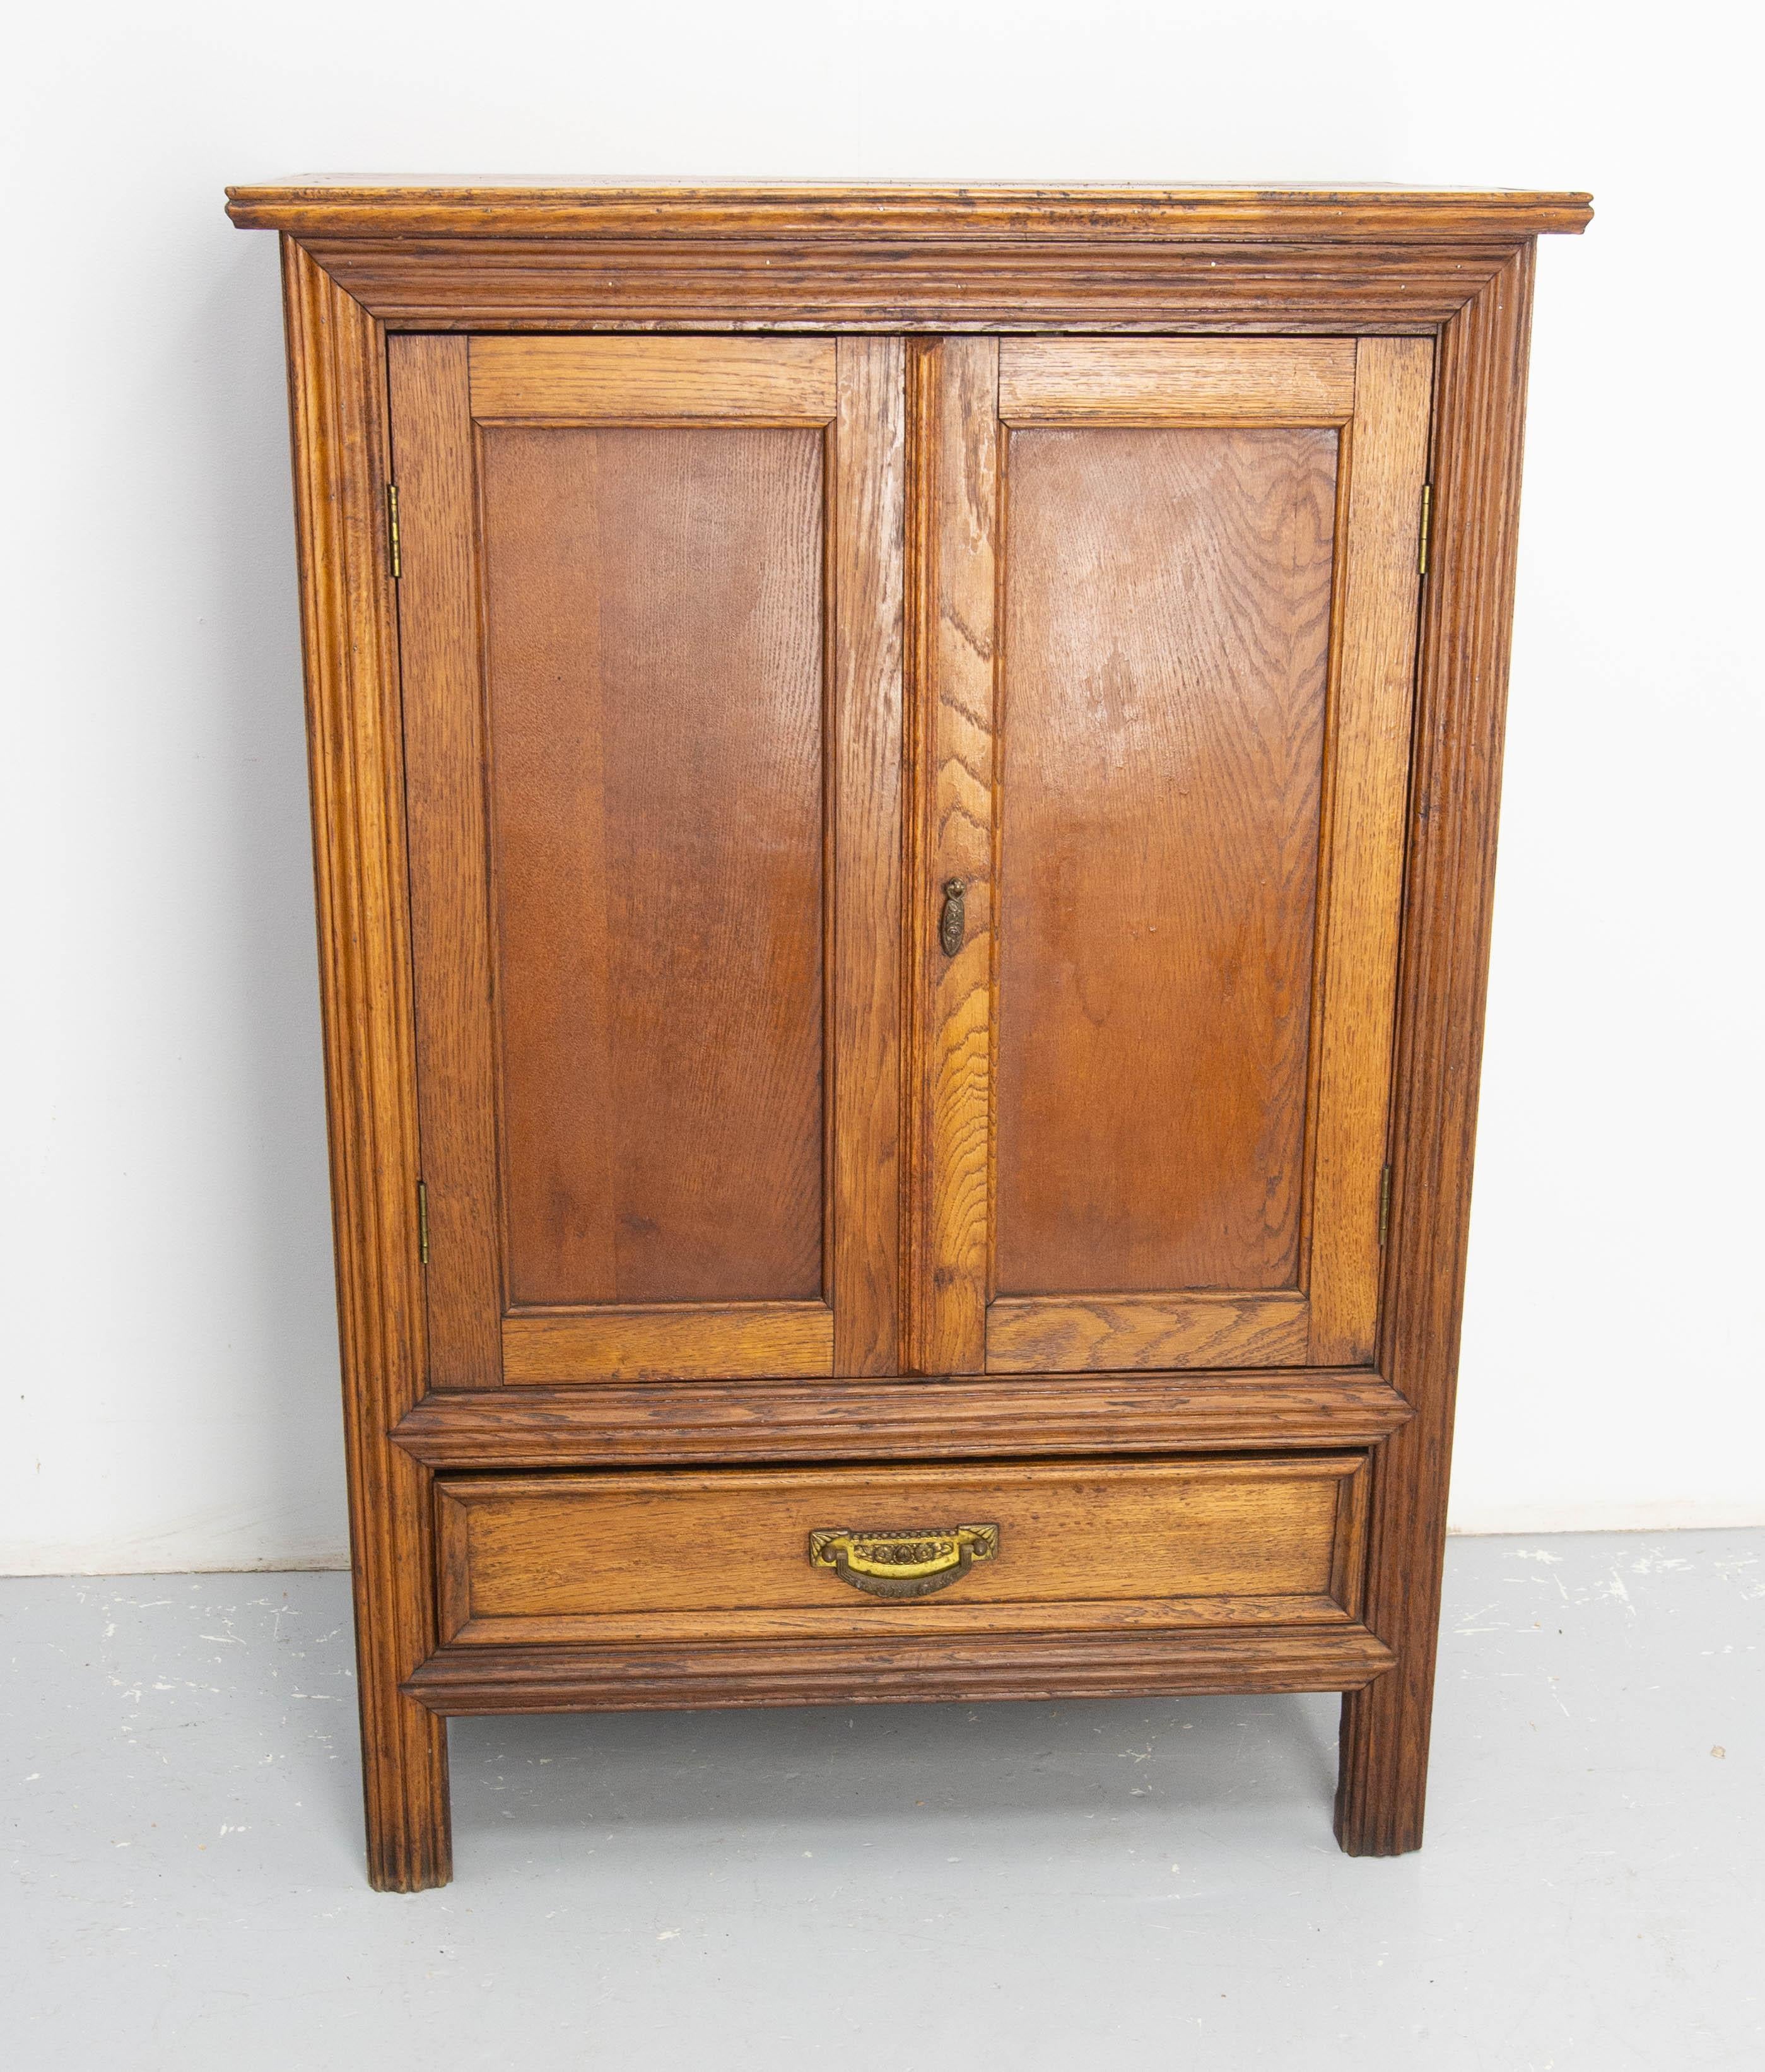 Art Déco French buffet oak and brass.
Made circa 1930
Two doors and one drawer.
This type of cabinet was used in bourgeois houses to store pots of jam (confiture in french), hence its French name 